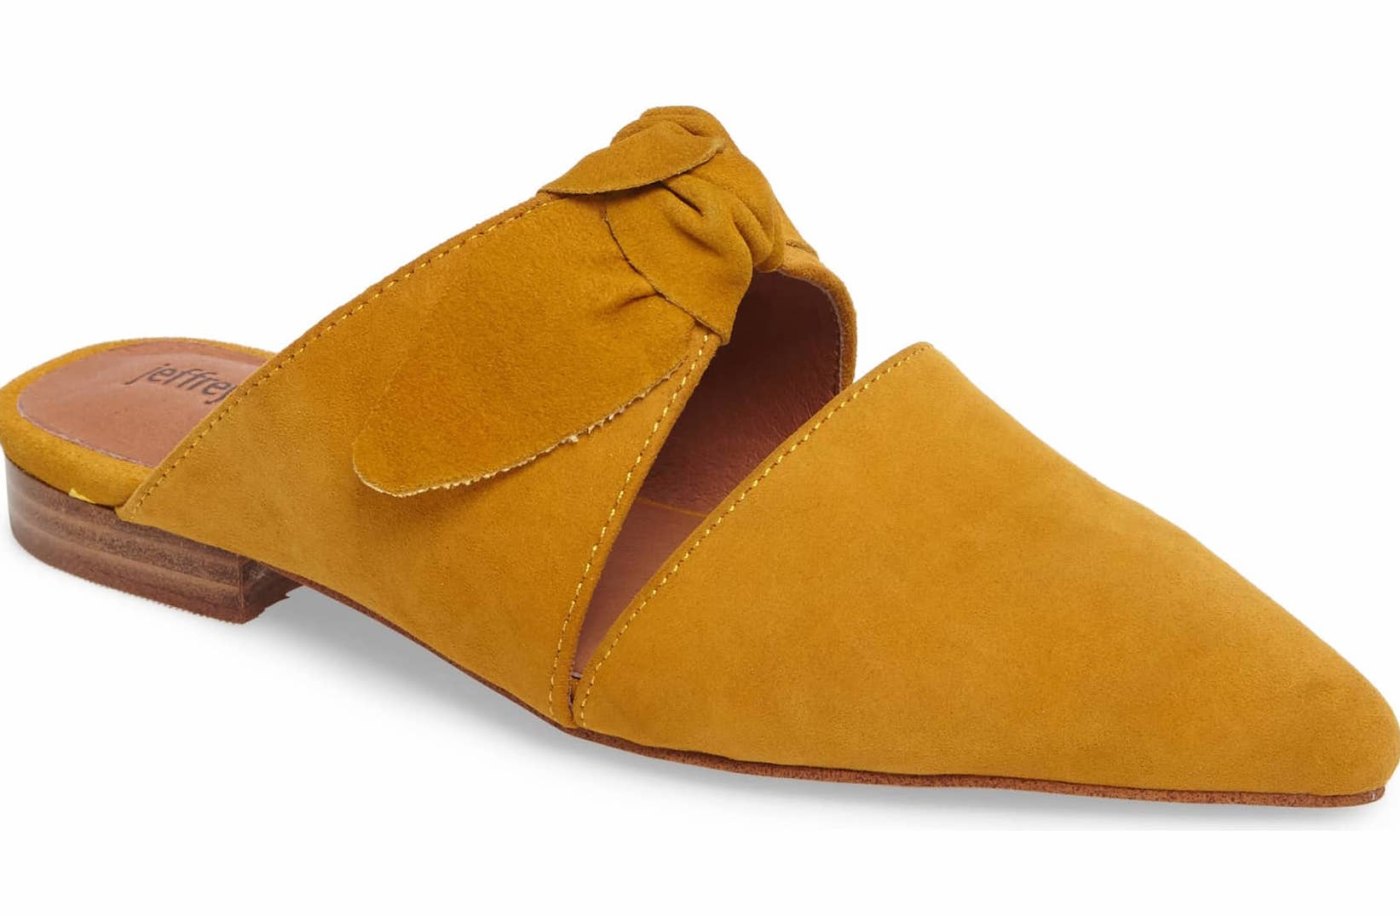 Shop These Jeffrey Campbell Suede Bow Mules at Nordstrom | Us Weekly